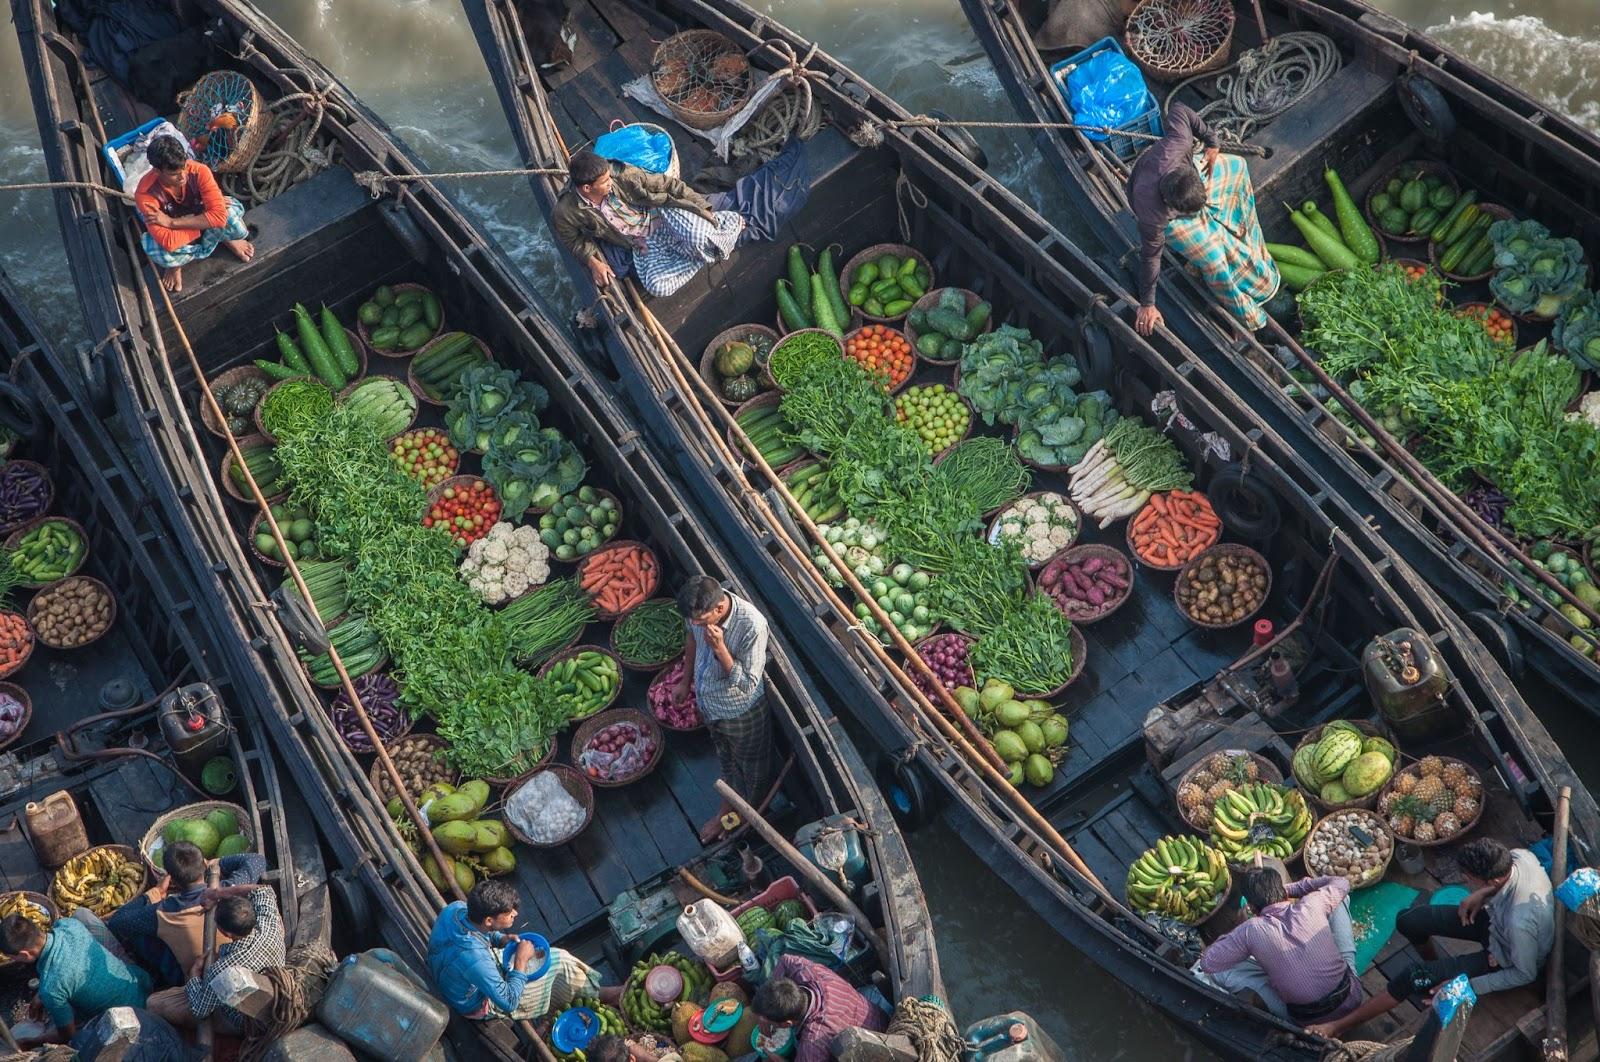 Bangladesh people sell goods from boat. Traditional floating bazaar.